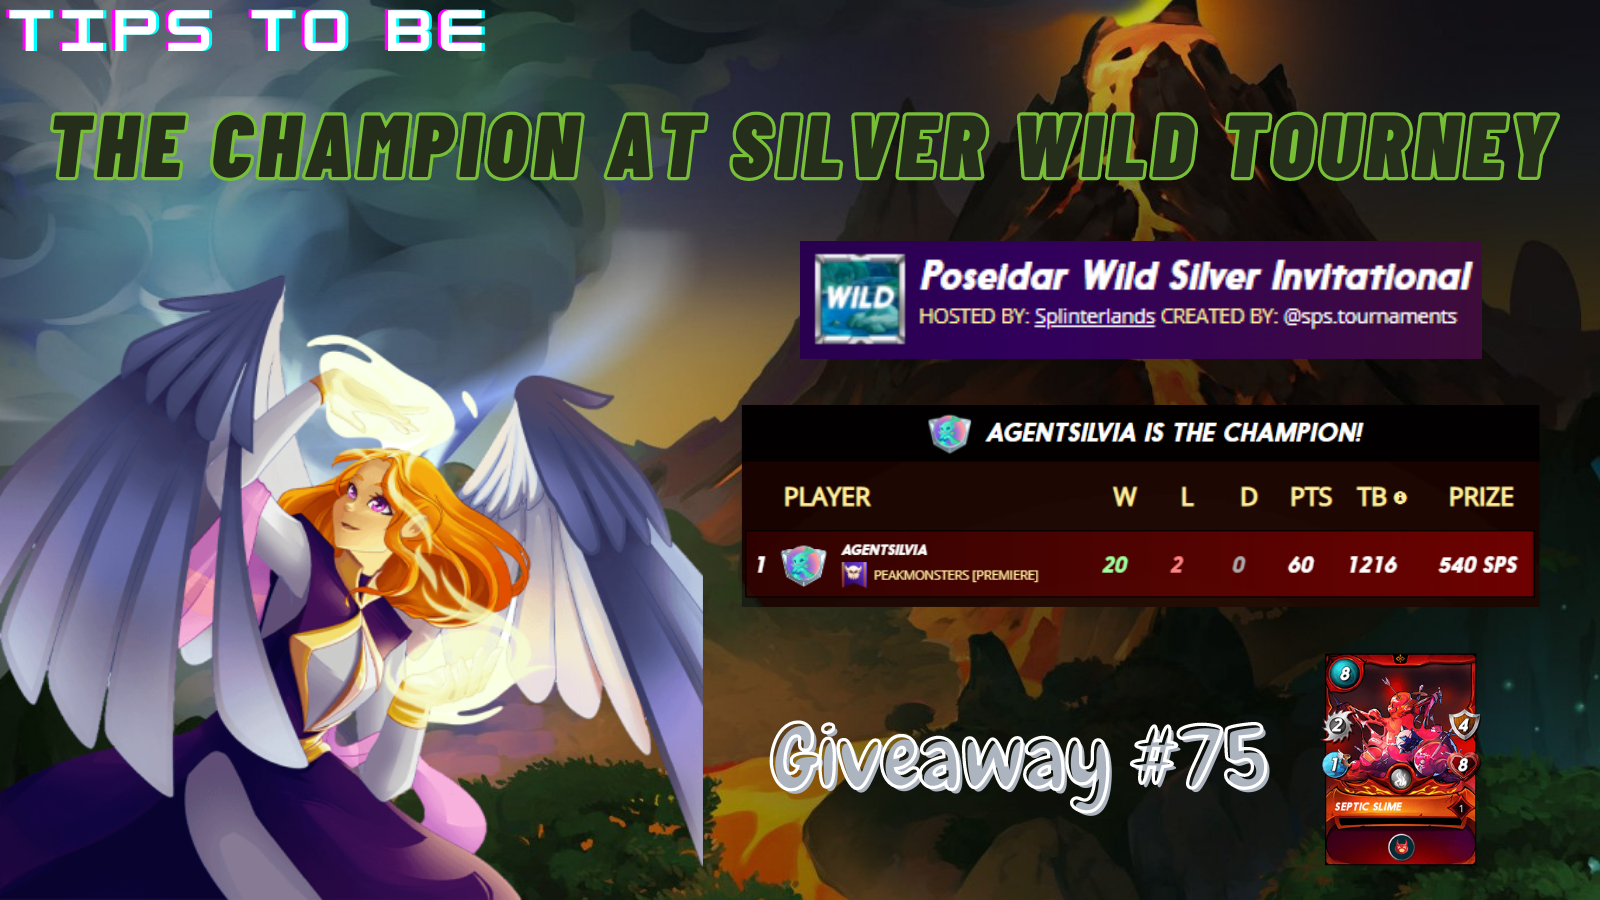 @queen-silvia/tips-to-be-the-champion-at-silver-wild-tourney-plus-giveaway-75-septic-slime